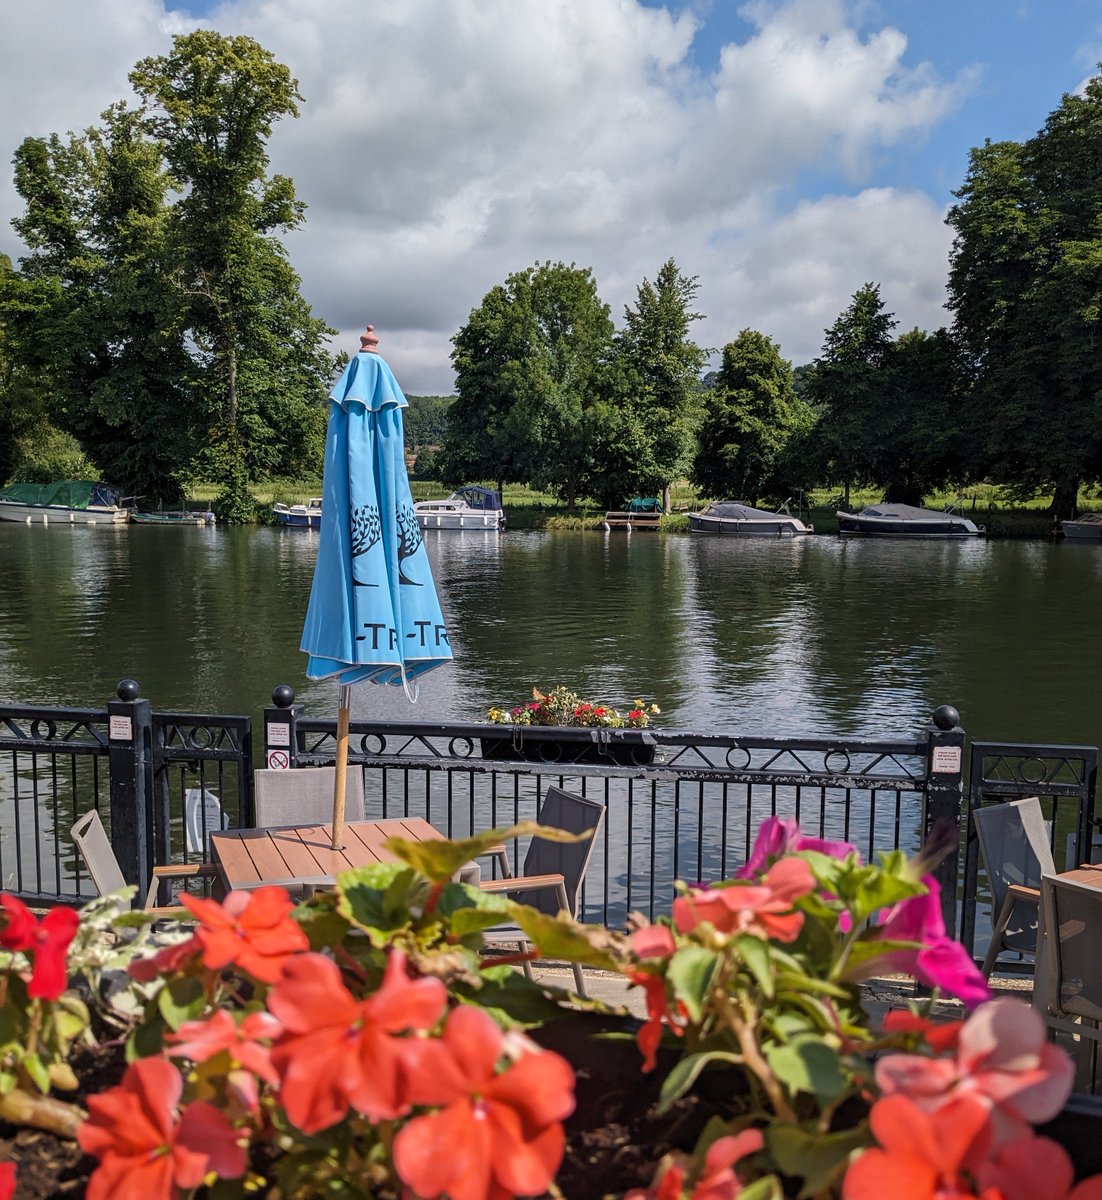 Today is officially first day of summer 😍 what better way to celebrate than with a nice cold drink and bite to eat with this view 😁 See you soon 😉 #summer #sunisshining #food #drink #friends #riverside #riverview #walk #naturelovers #relax #pangbourne